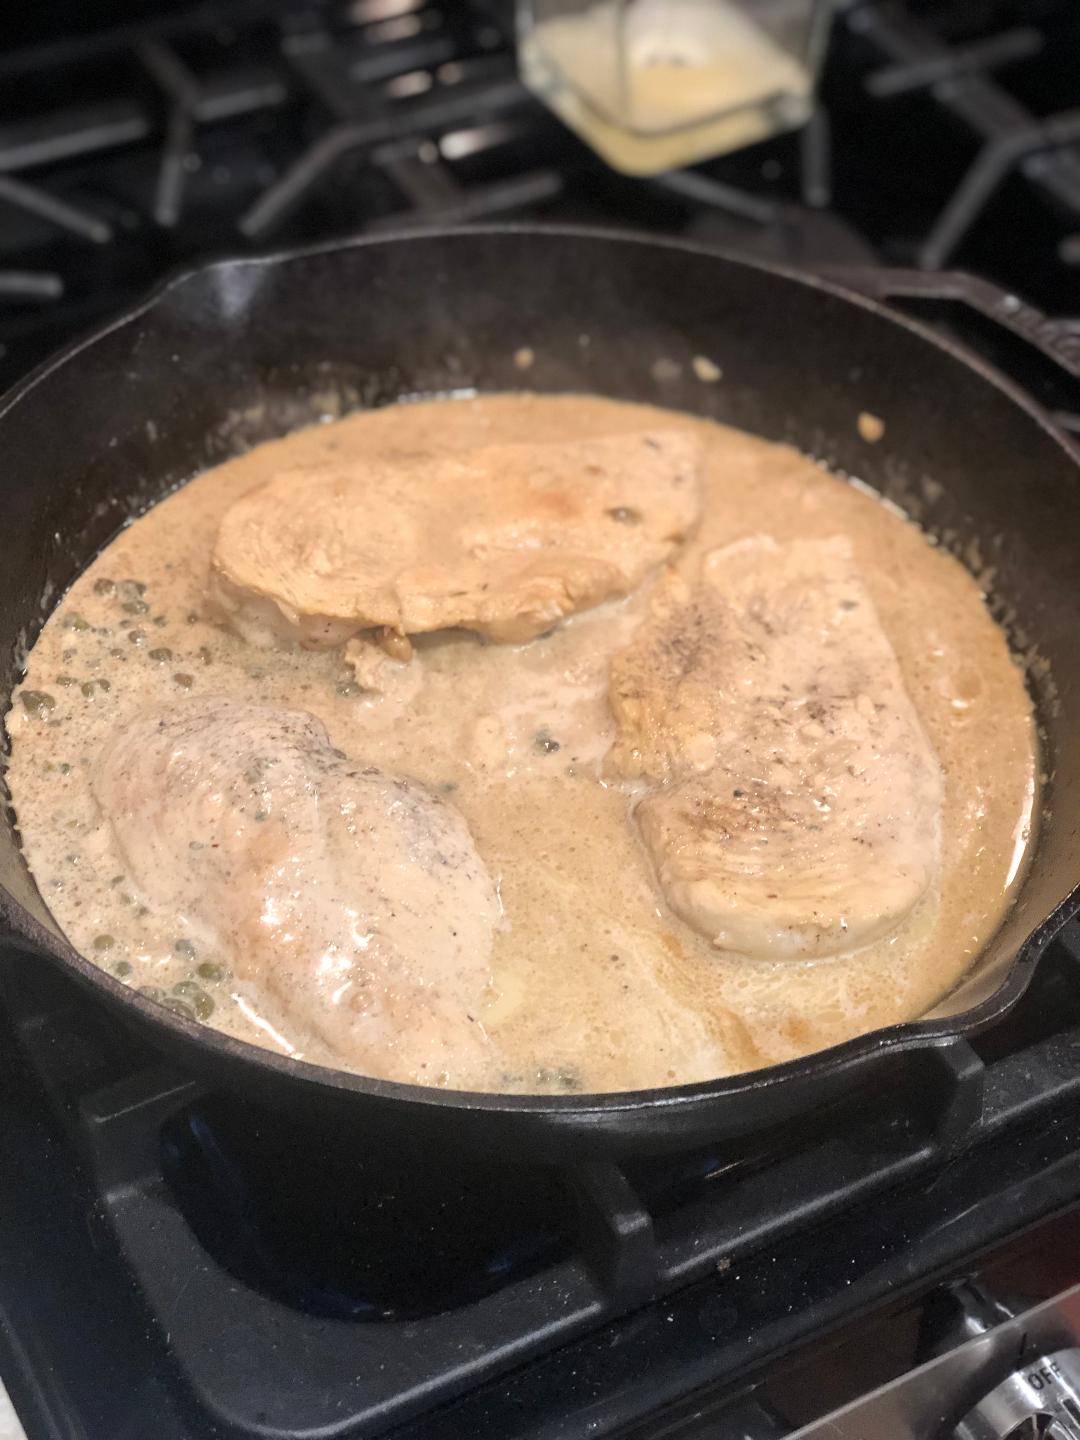 lemon garlic chicken cooking away in a cast iron skillet on the stove